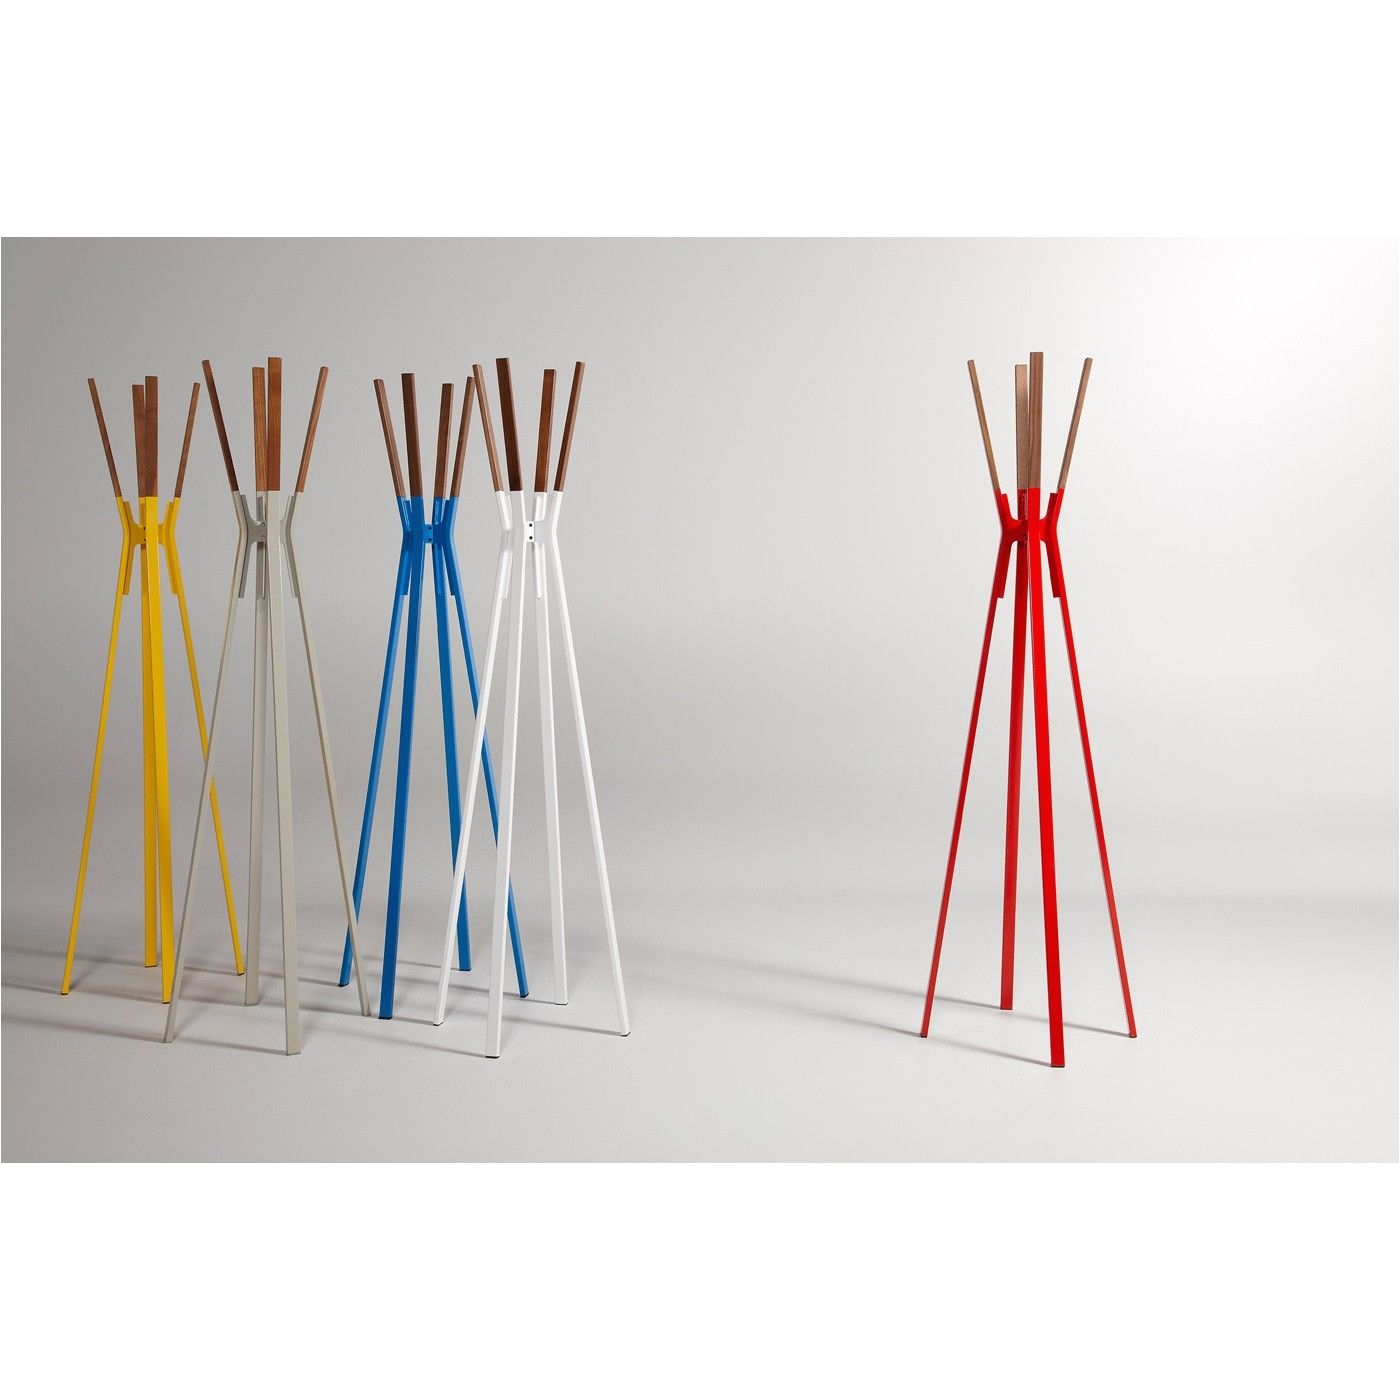 splash coat rack powder coated steel and solid walnut stand at the ready to relieve